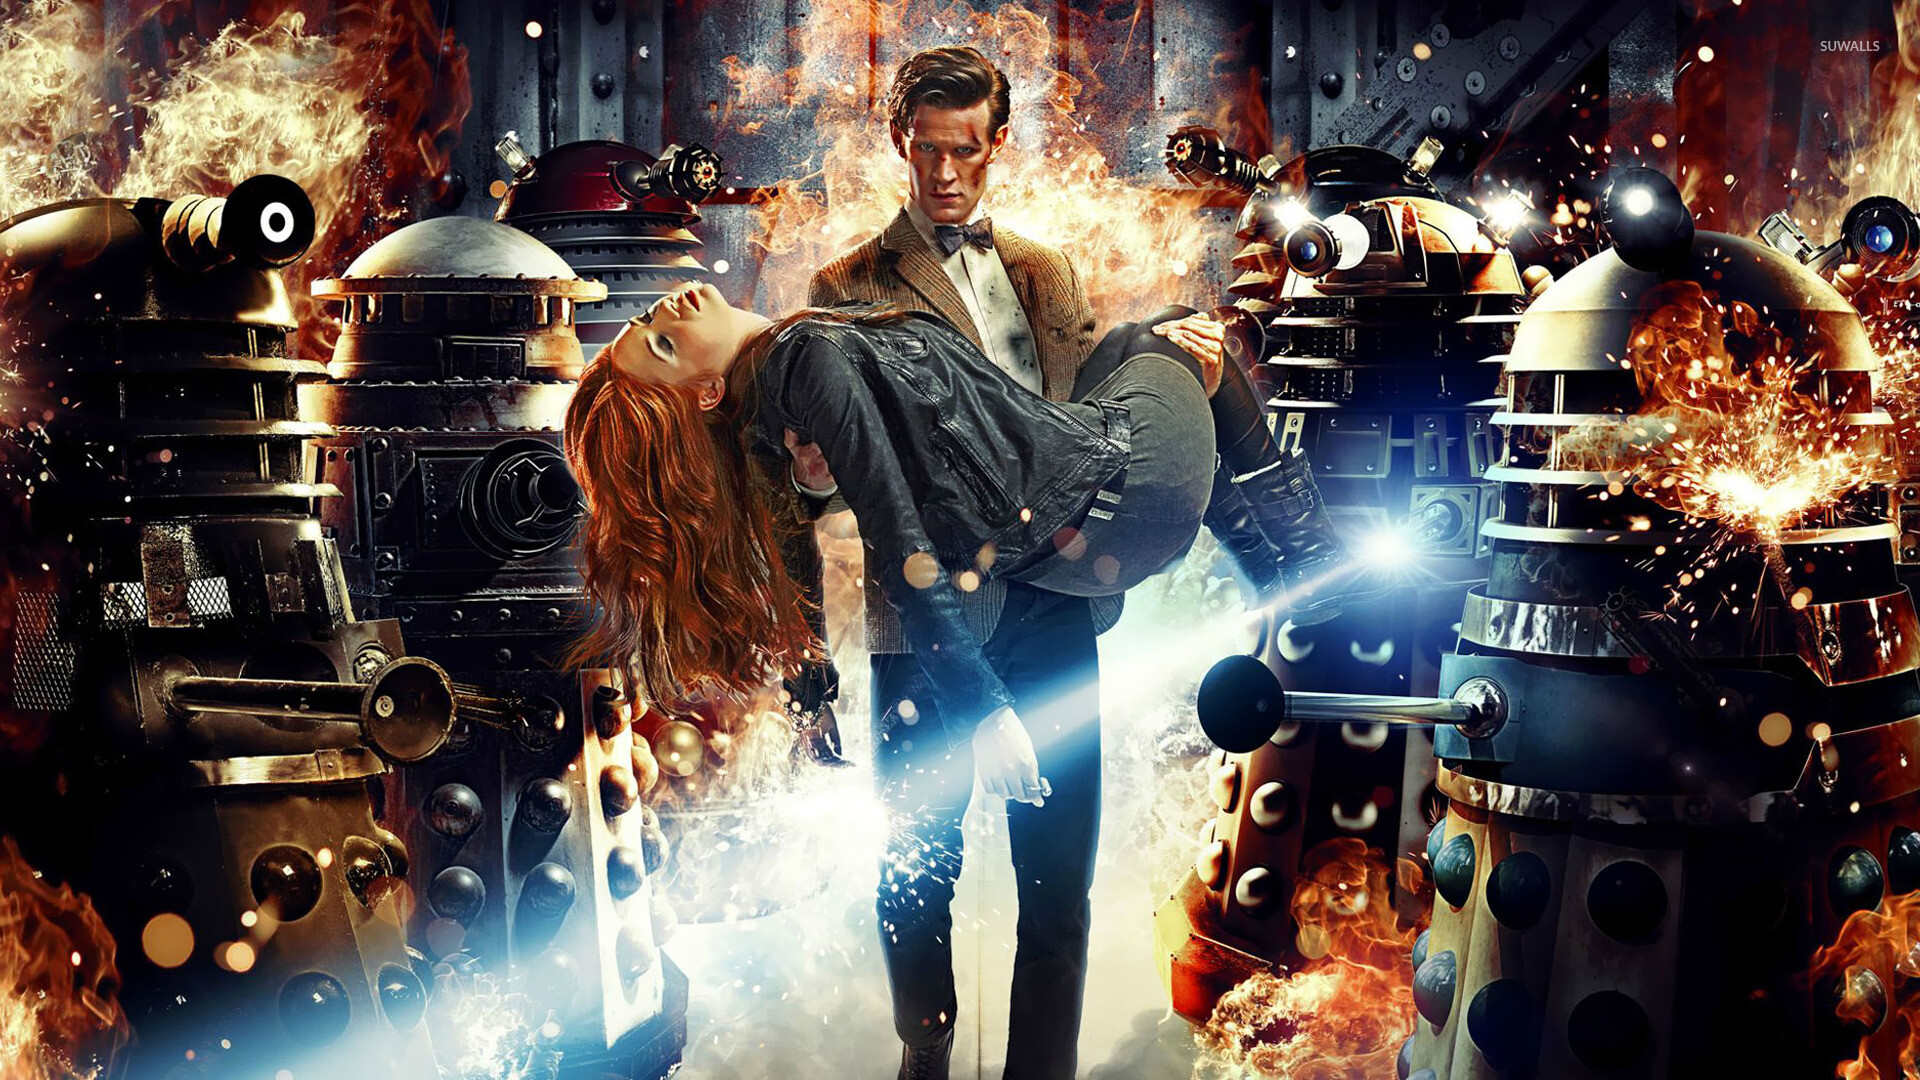 Doctor Who: The Doctor and Amy Pond, Asylum of the Daleks, Episode 1, Series 7. 1920x1080 Full HD Wallpaper.